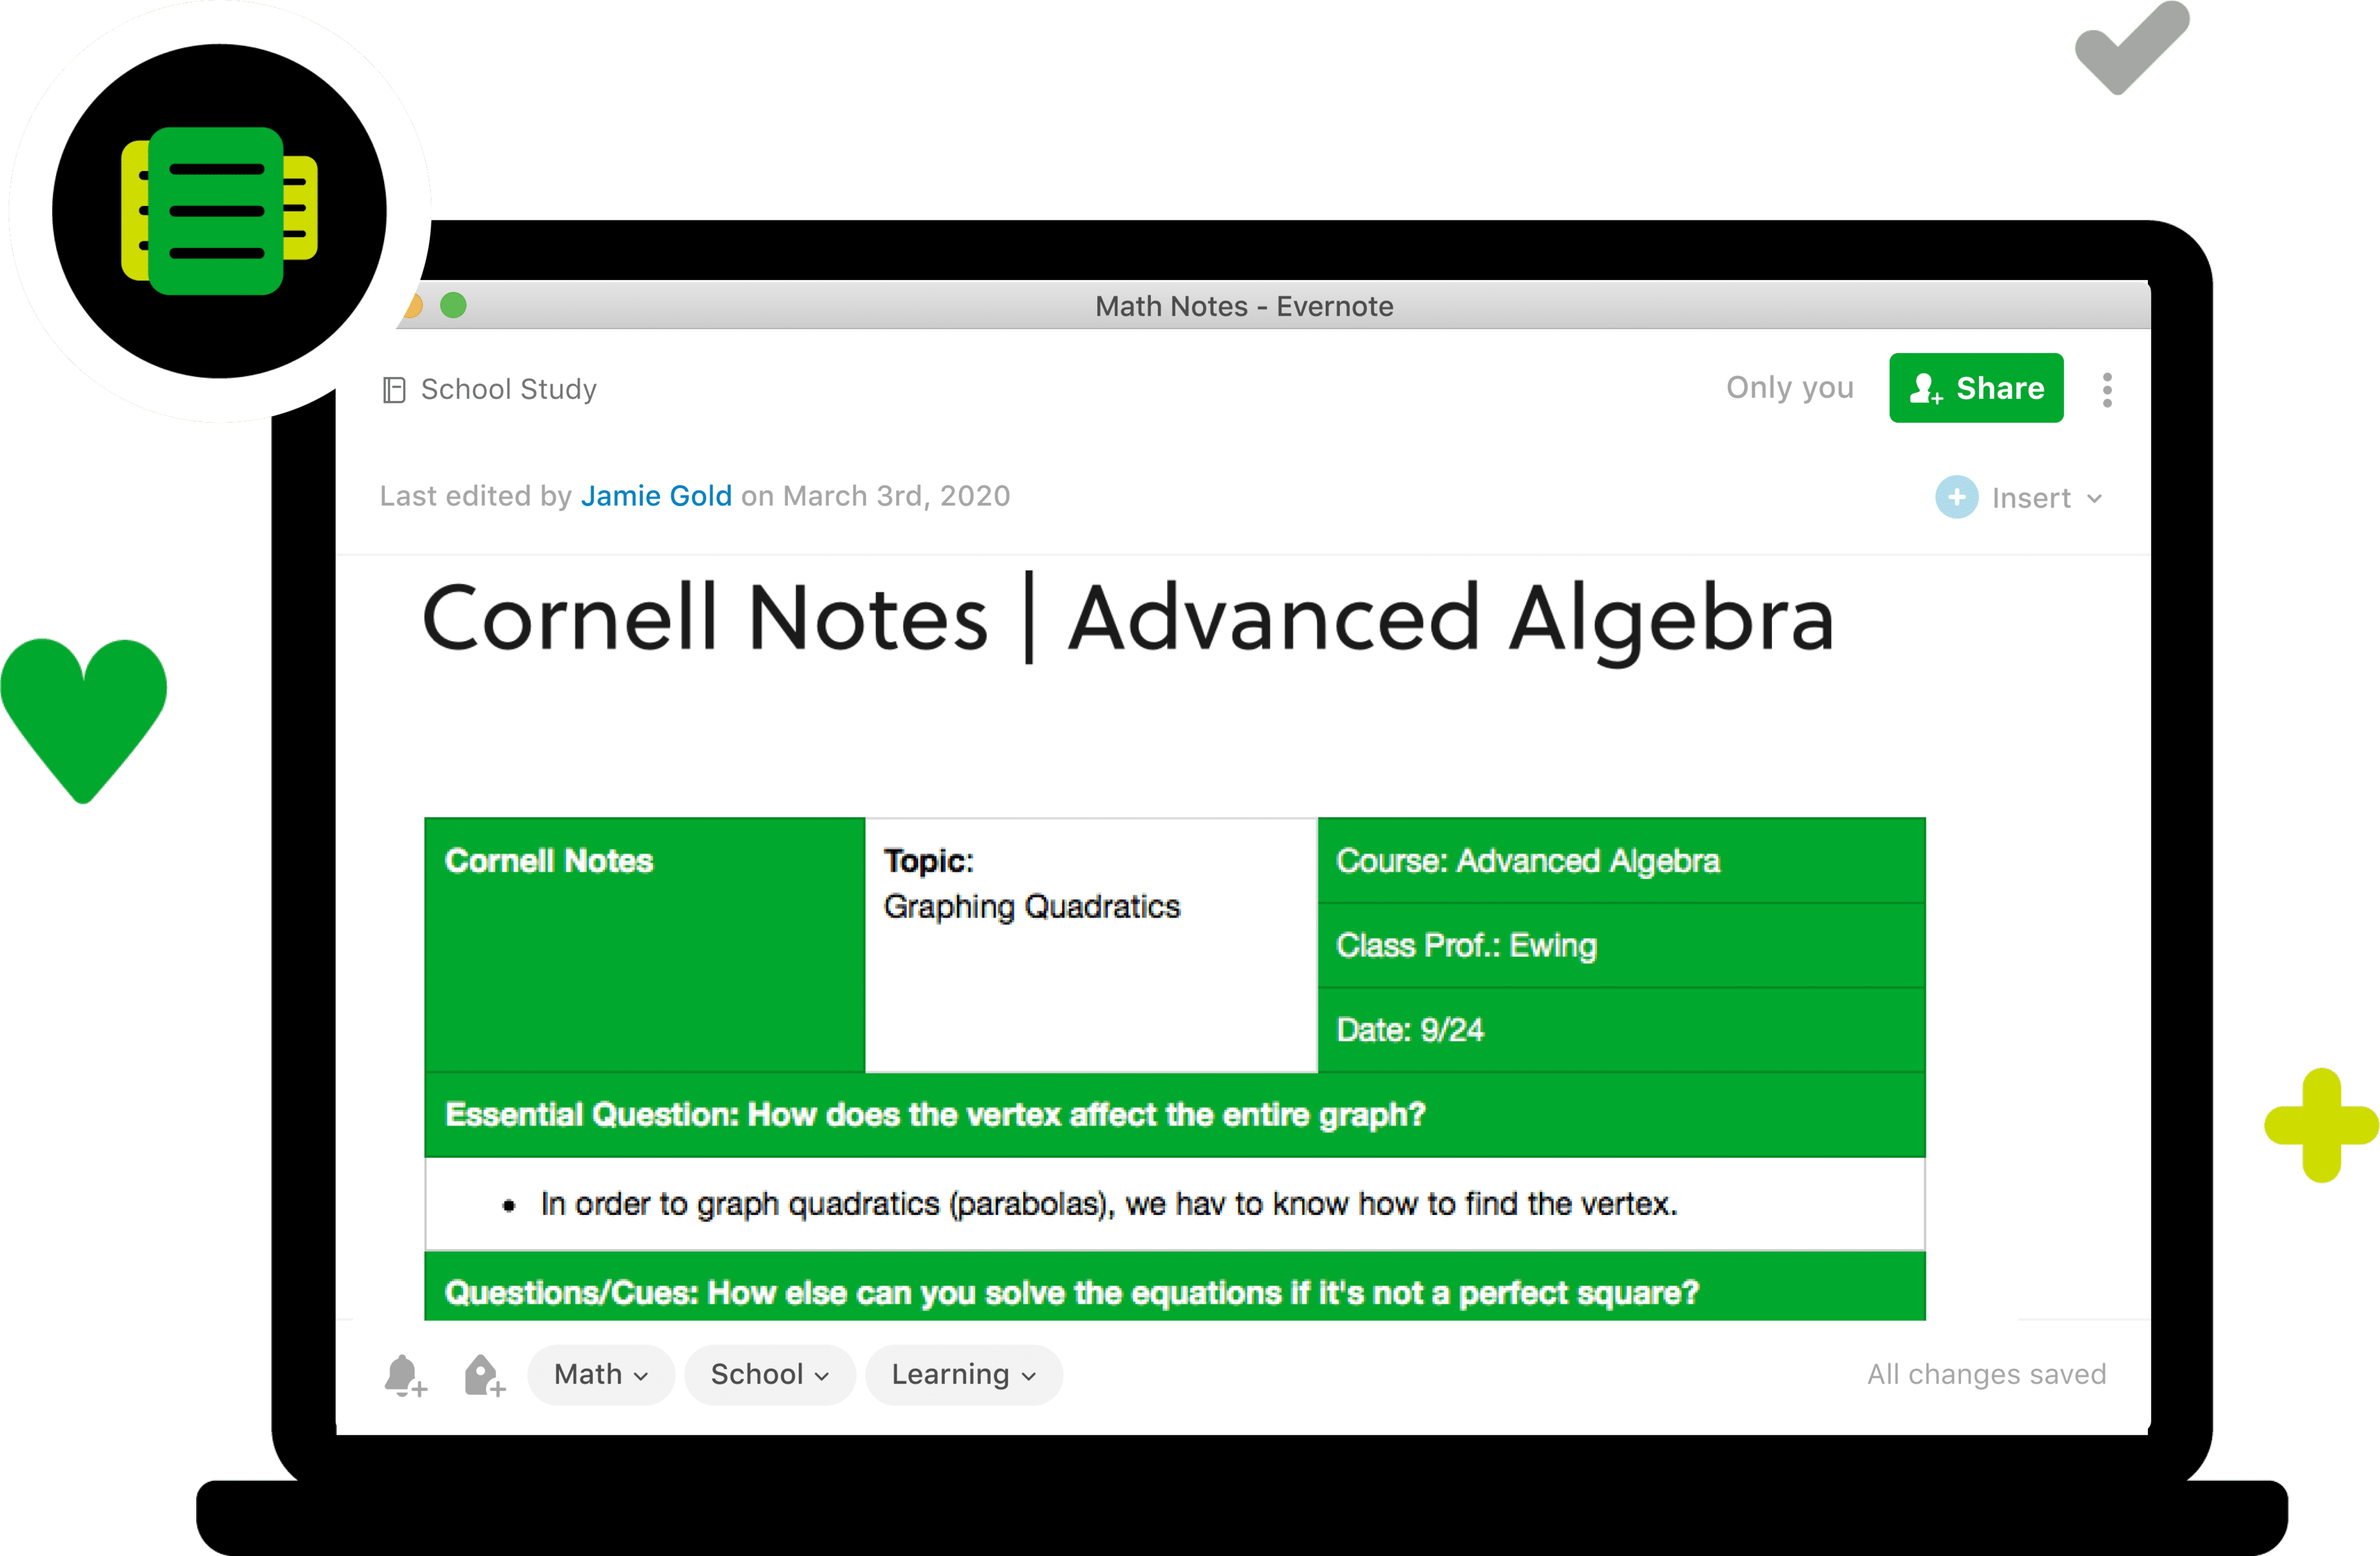 A screenshot of a note on Evernote.